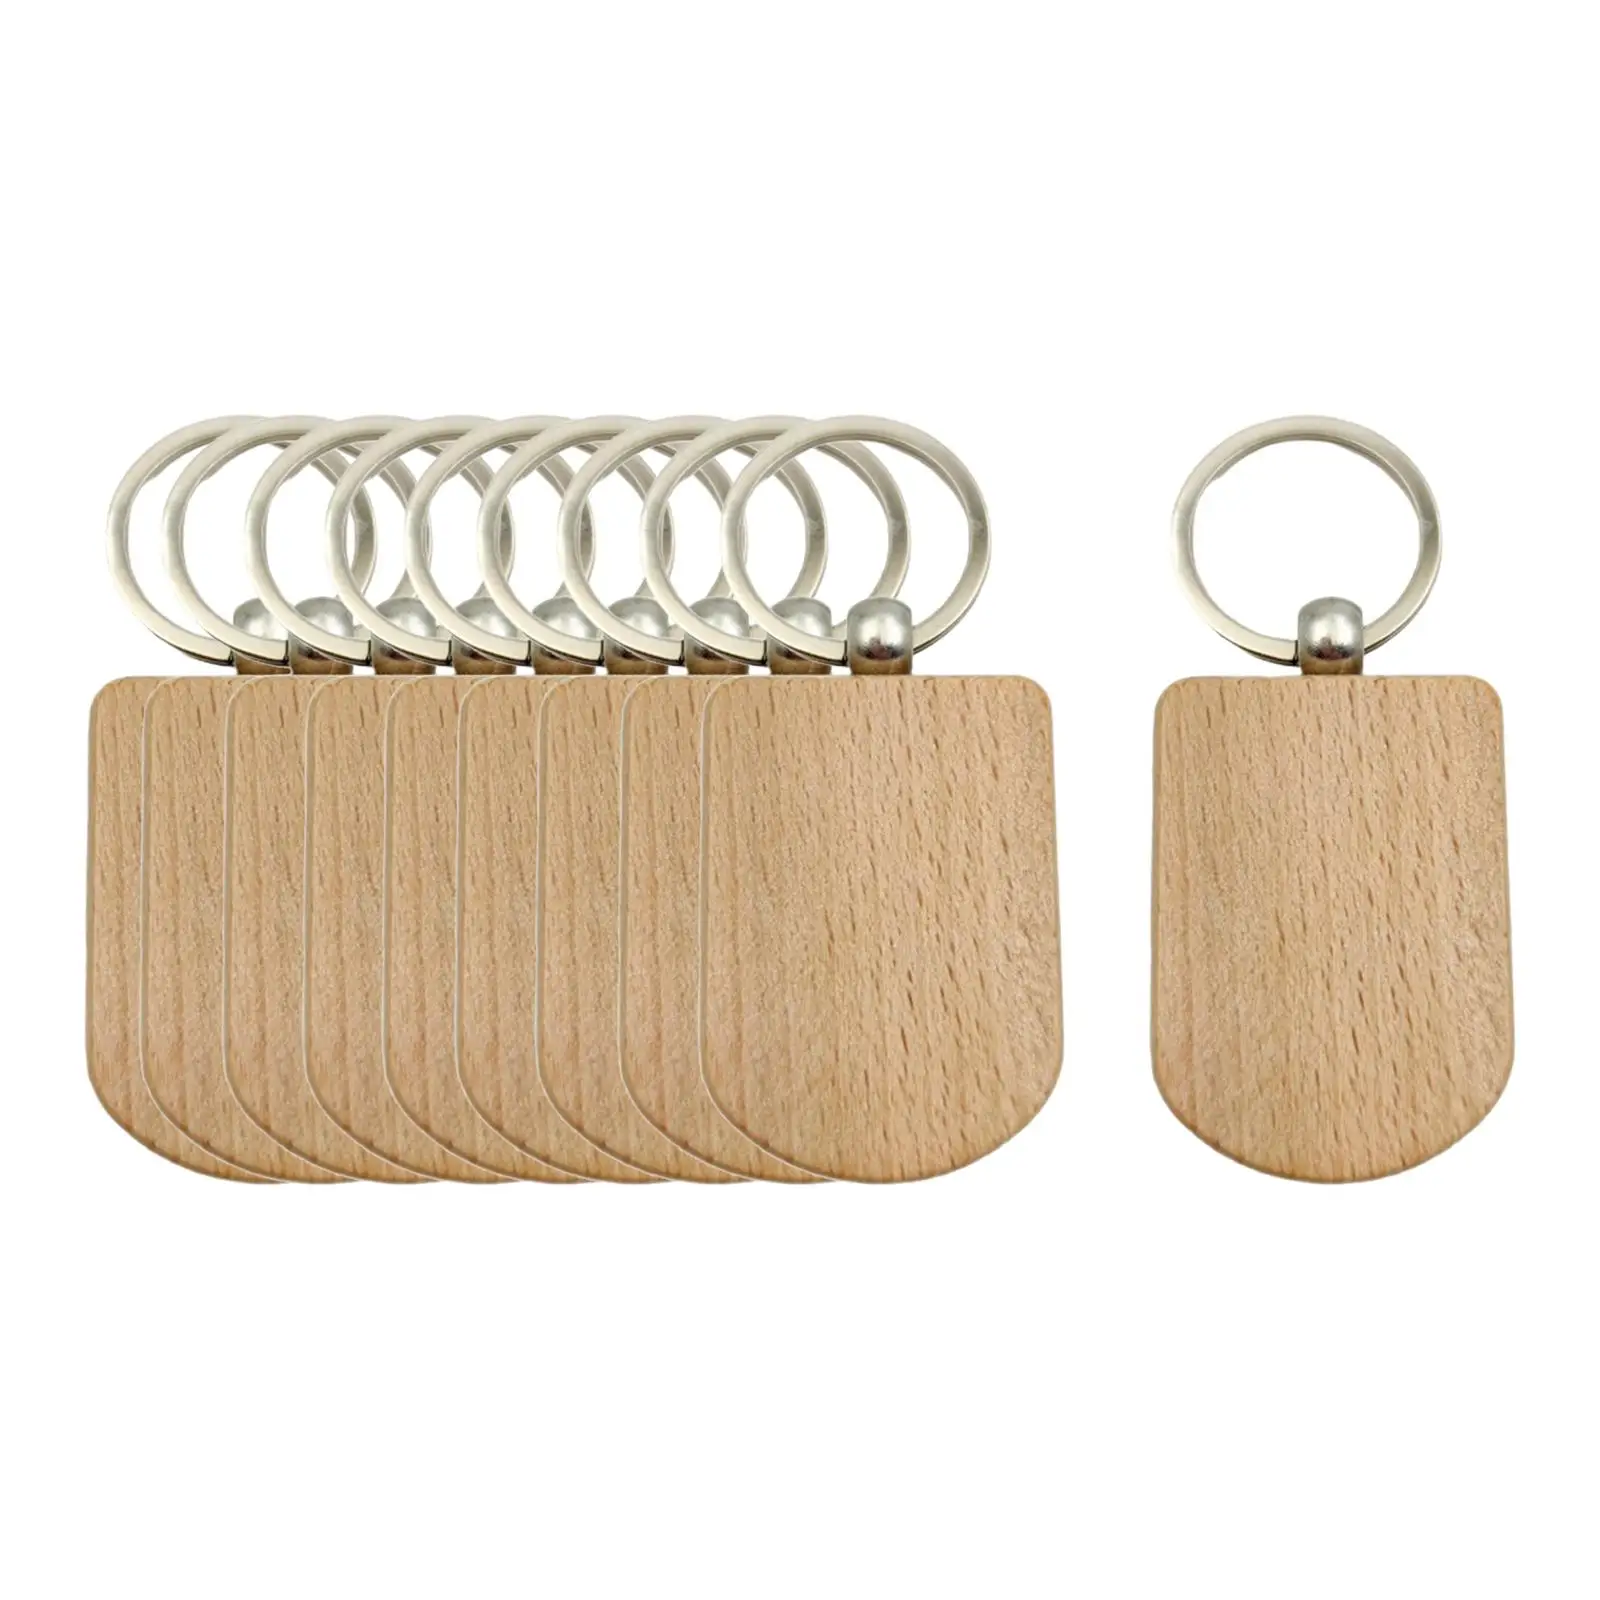 10Pcs Blanks Wooden Key Chain DIY Key Rings Handmade Unfinished Wood Piece Keychain Keyring for Crafting Engraving Pyrography